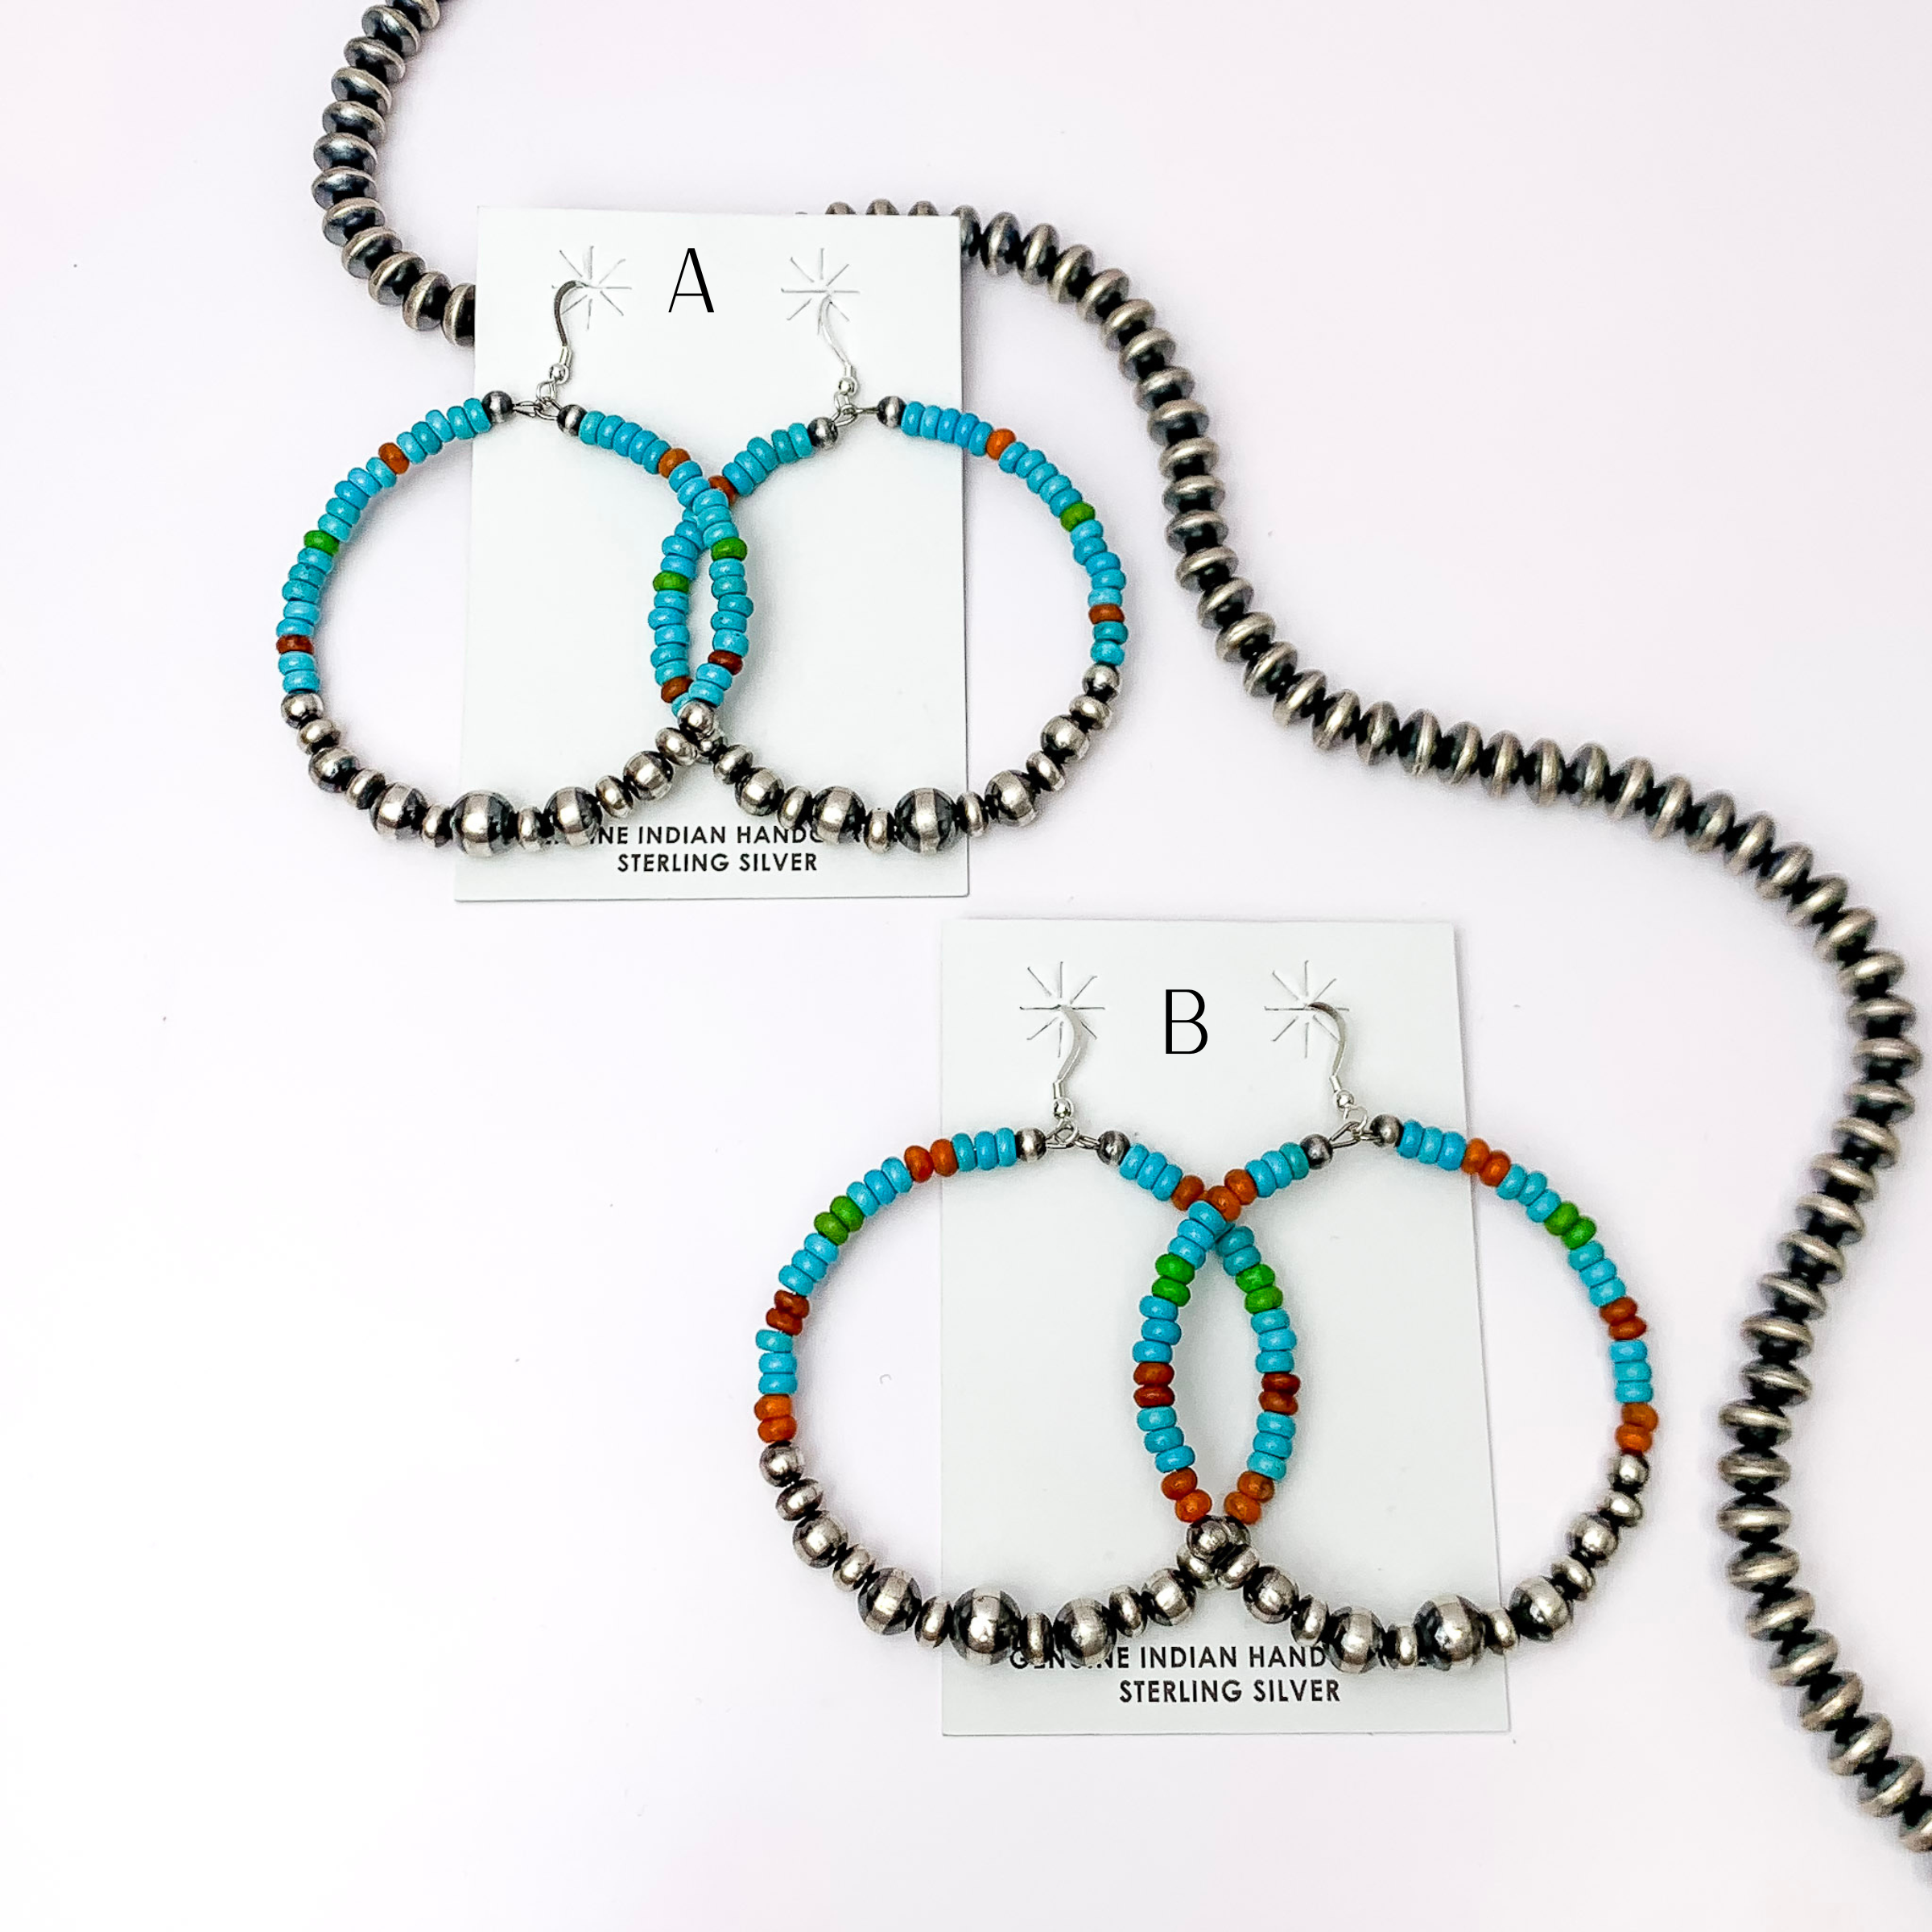 Navajo | Navajo Handmade Sterling Silver Navajo Pearl Hoop Earrings with Turquoise, Brown, and Green Beads - Giddy Up Glamour Boutique